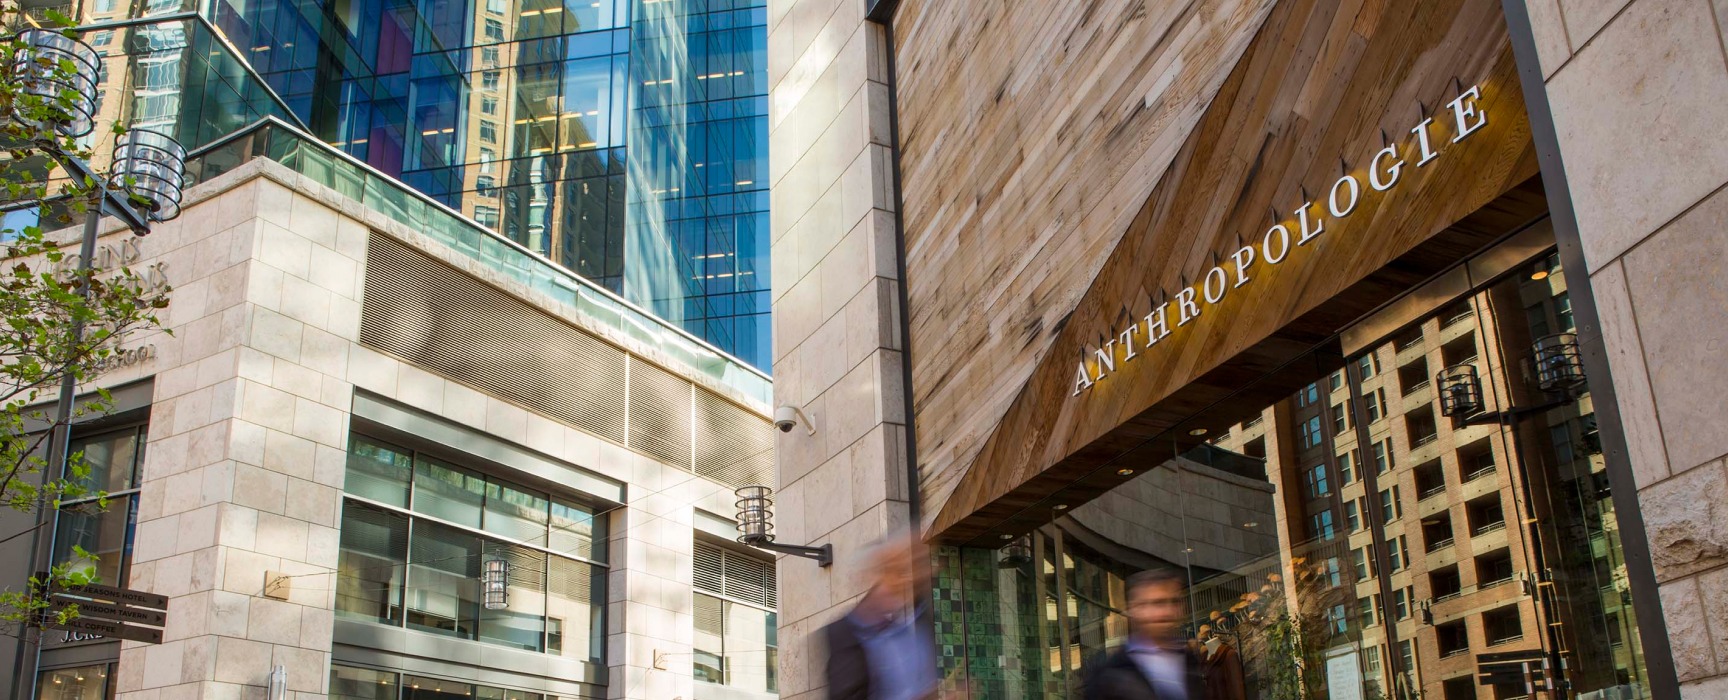 Two men whiz by the Anthropologie storefront in the center of Harbor East